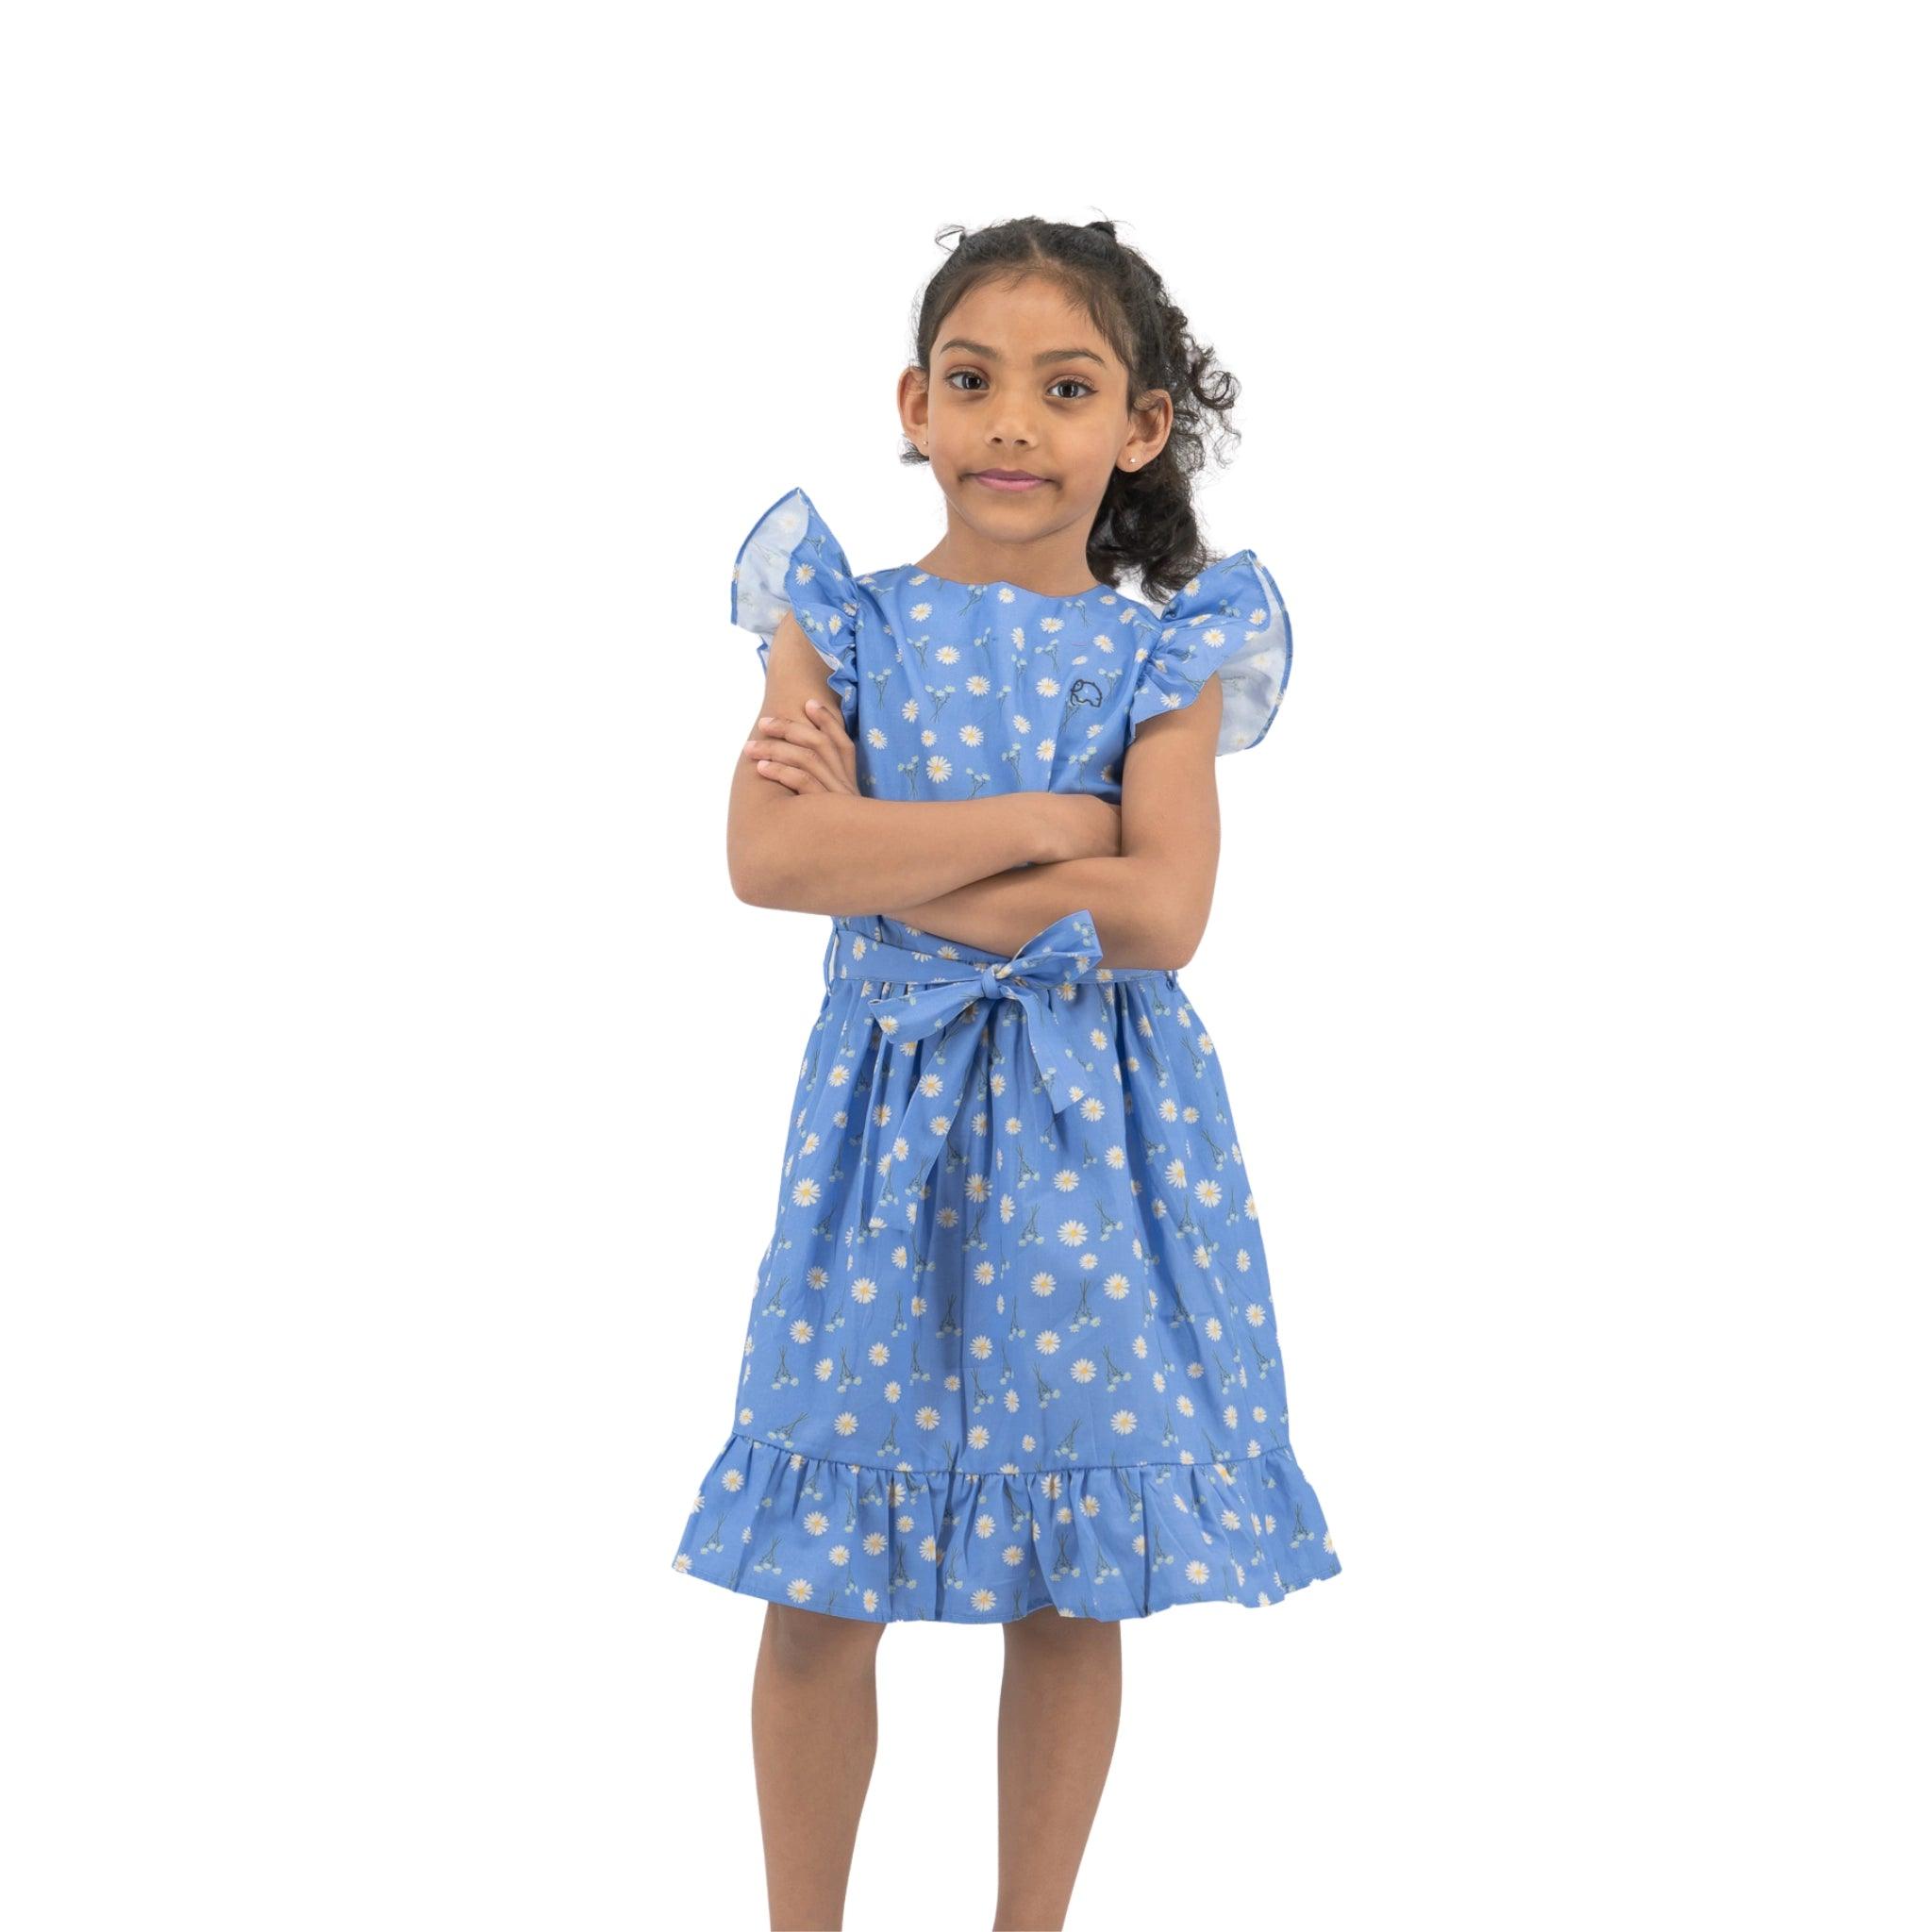 A young girl in a Karee Petite Blossom Cotton Dress in Corn Flour Blue standing with her arms crossed against a white background.